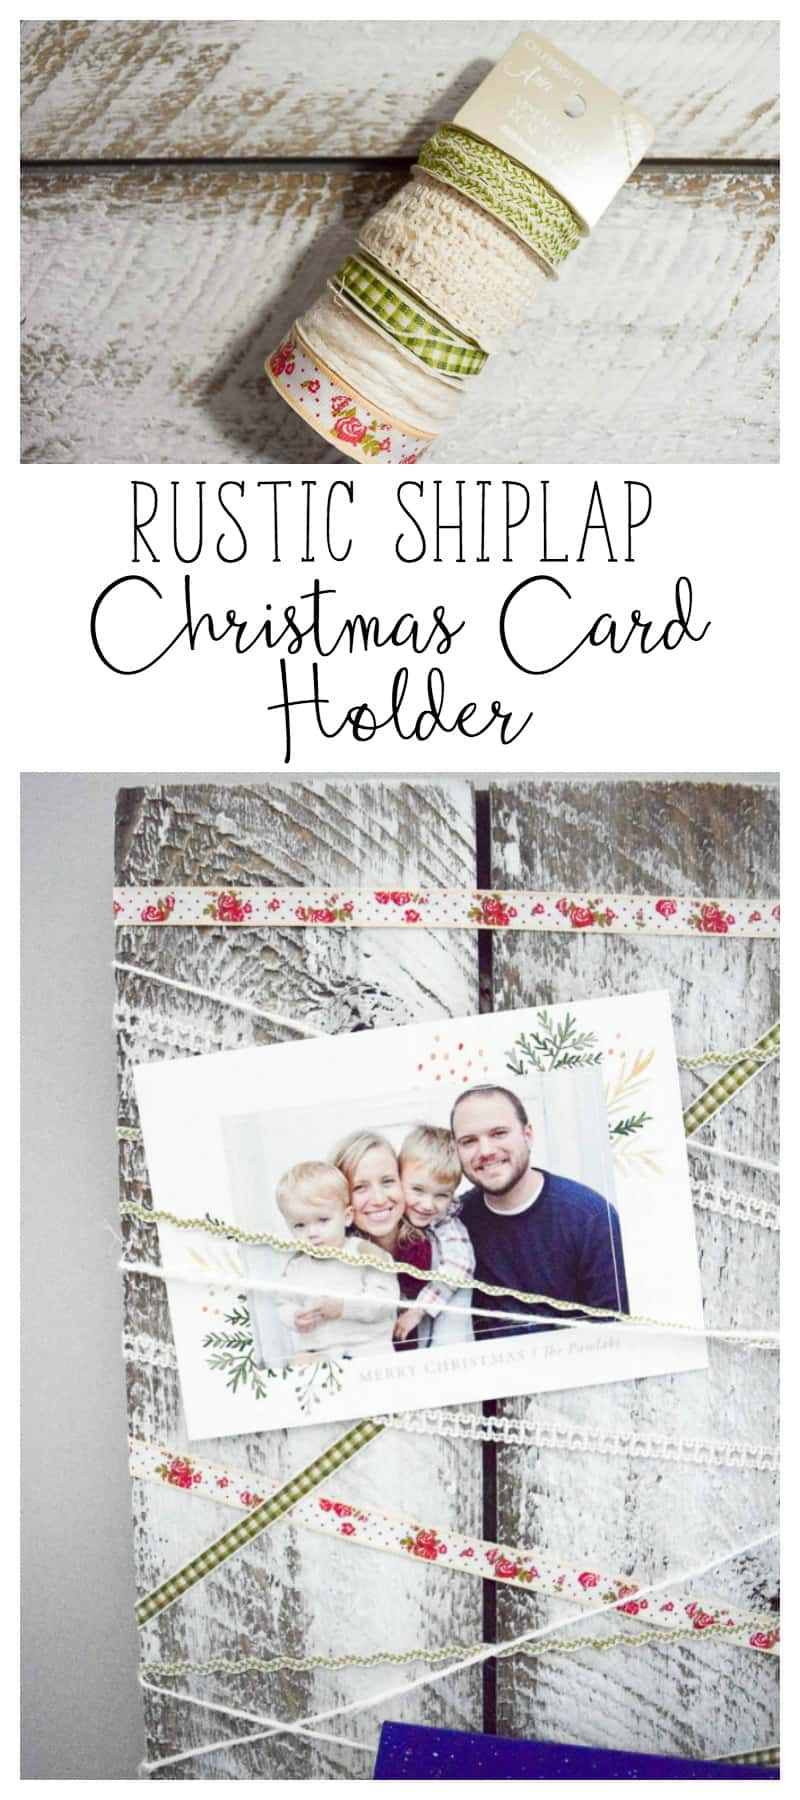 DIY Christmas Card Holder using ghost wood shiplap painted white with ribbon to wrap and hold Cards